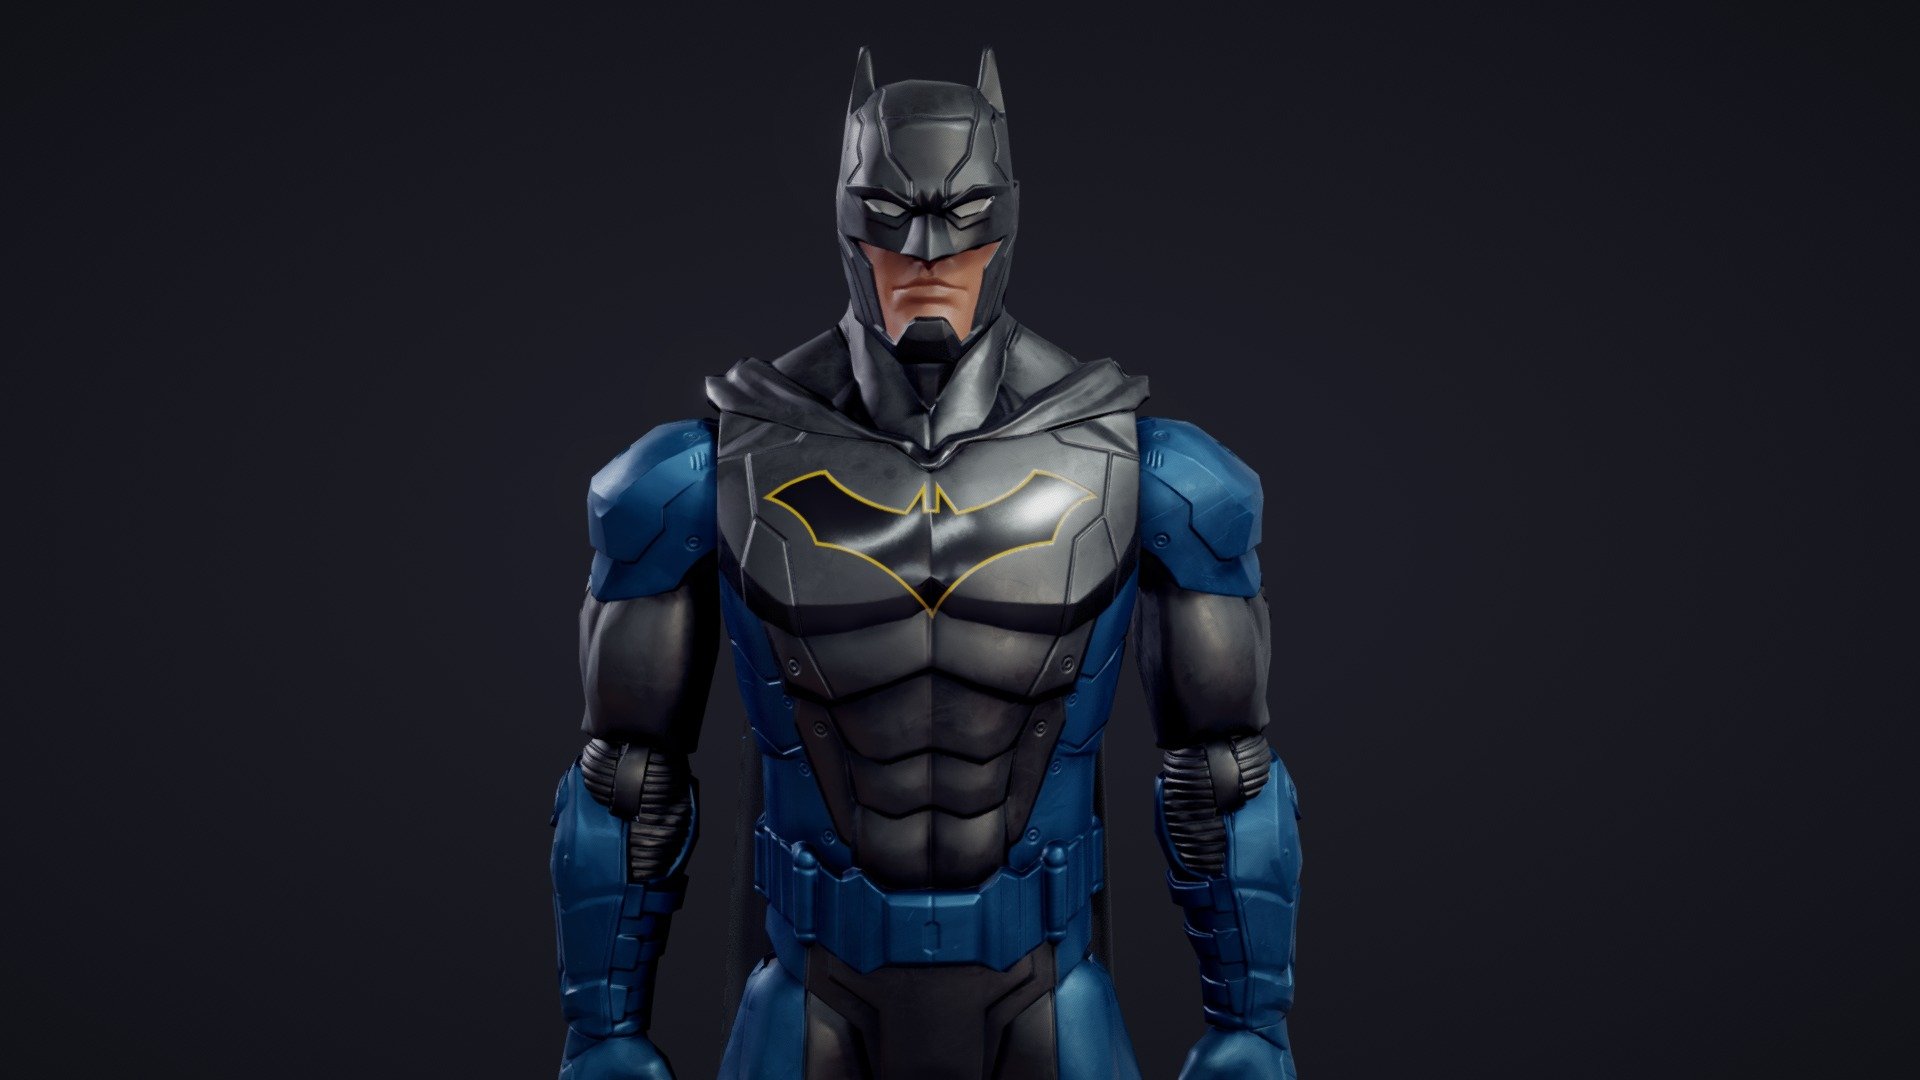 This model was remeshed from a high resoltuion CAD model using InstaLOD which captured all the detail in original 1 million poly model.  The original model was painted in 5 UDIMS in Substance Painter and the cape was made in Marvelous designer. The model was animated in Maya and this drove the cape sim. Everythign was then exported in Alembic format and imported to Sketchfab 3d model